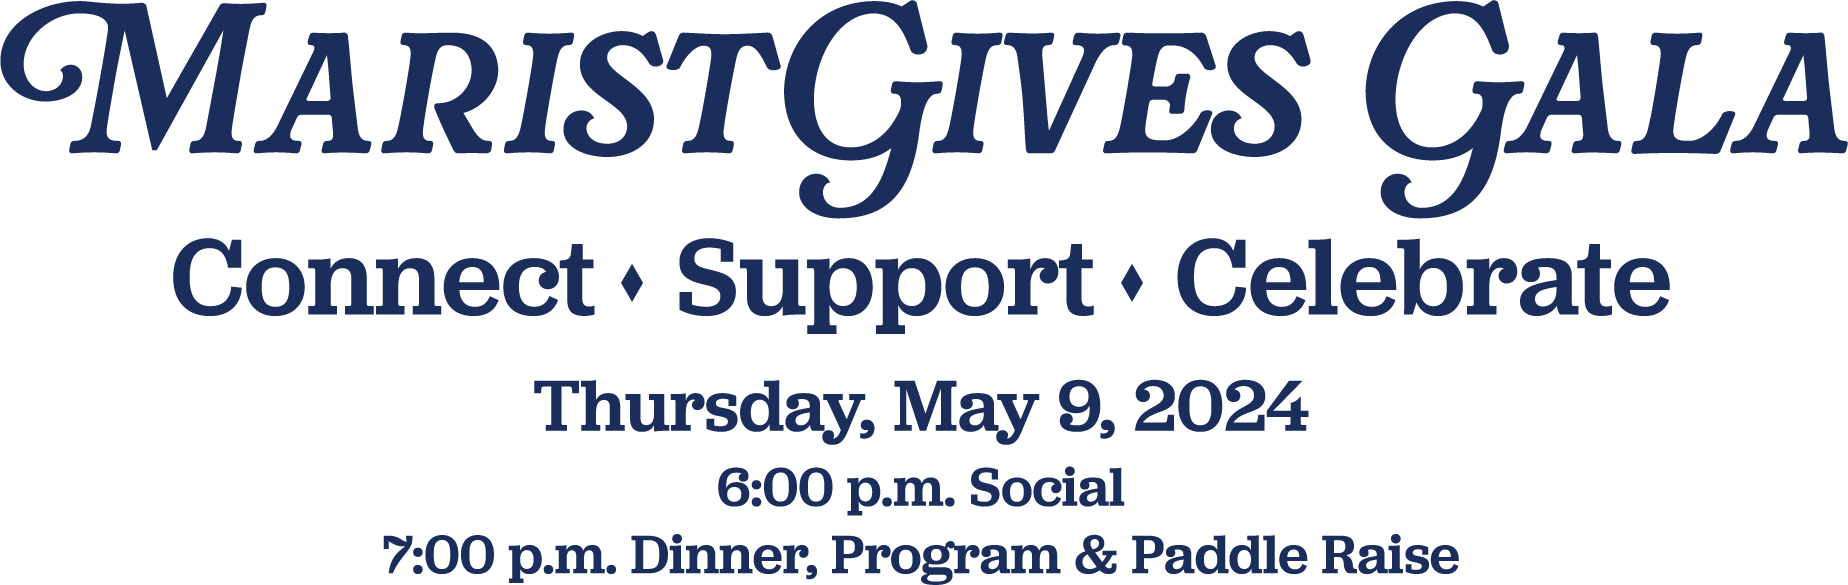 MaristGives Gala. Connect, support, celebrate. Thursday, May 9, 2024. 6:00 p.m. Social. 7:00 p.m. Dinner, program and paddle raise.